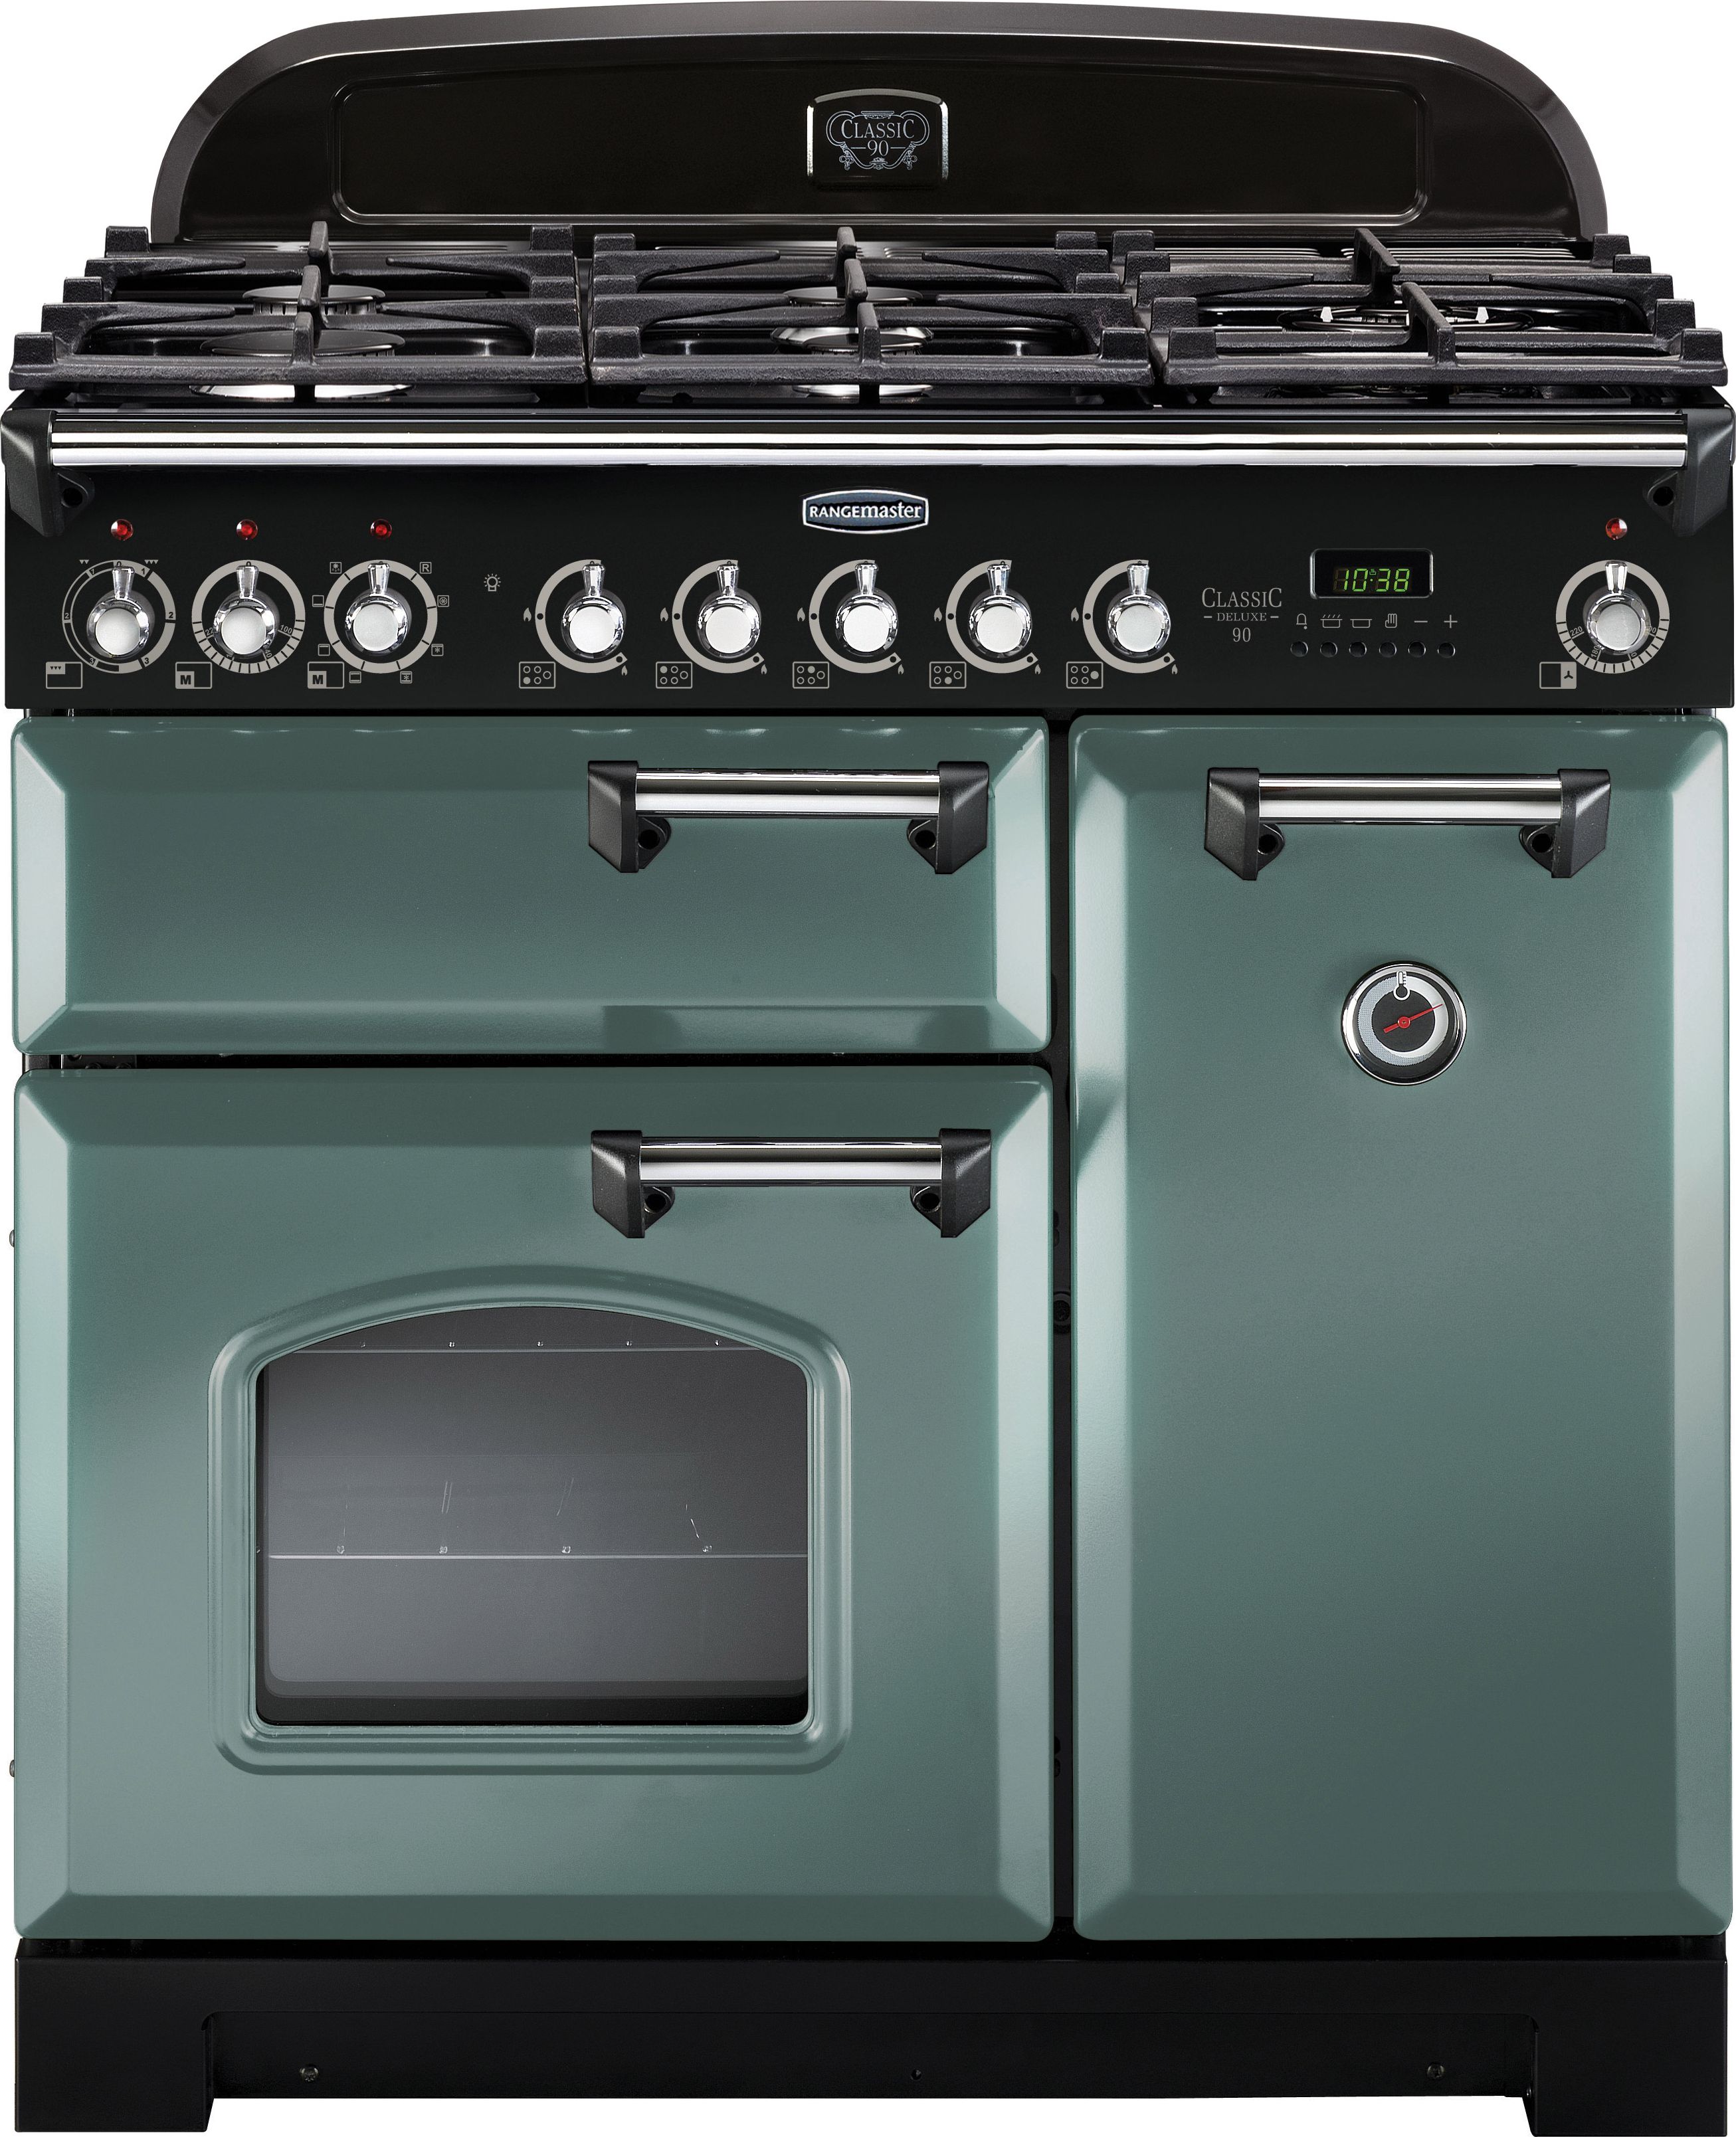 Rangemaster Classic Deluxe CDL90DFFMG/C 90cm Dual Fuel Range Cooker - Mineral Green / Chrome - A/A Rated, Green